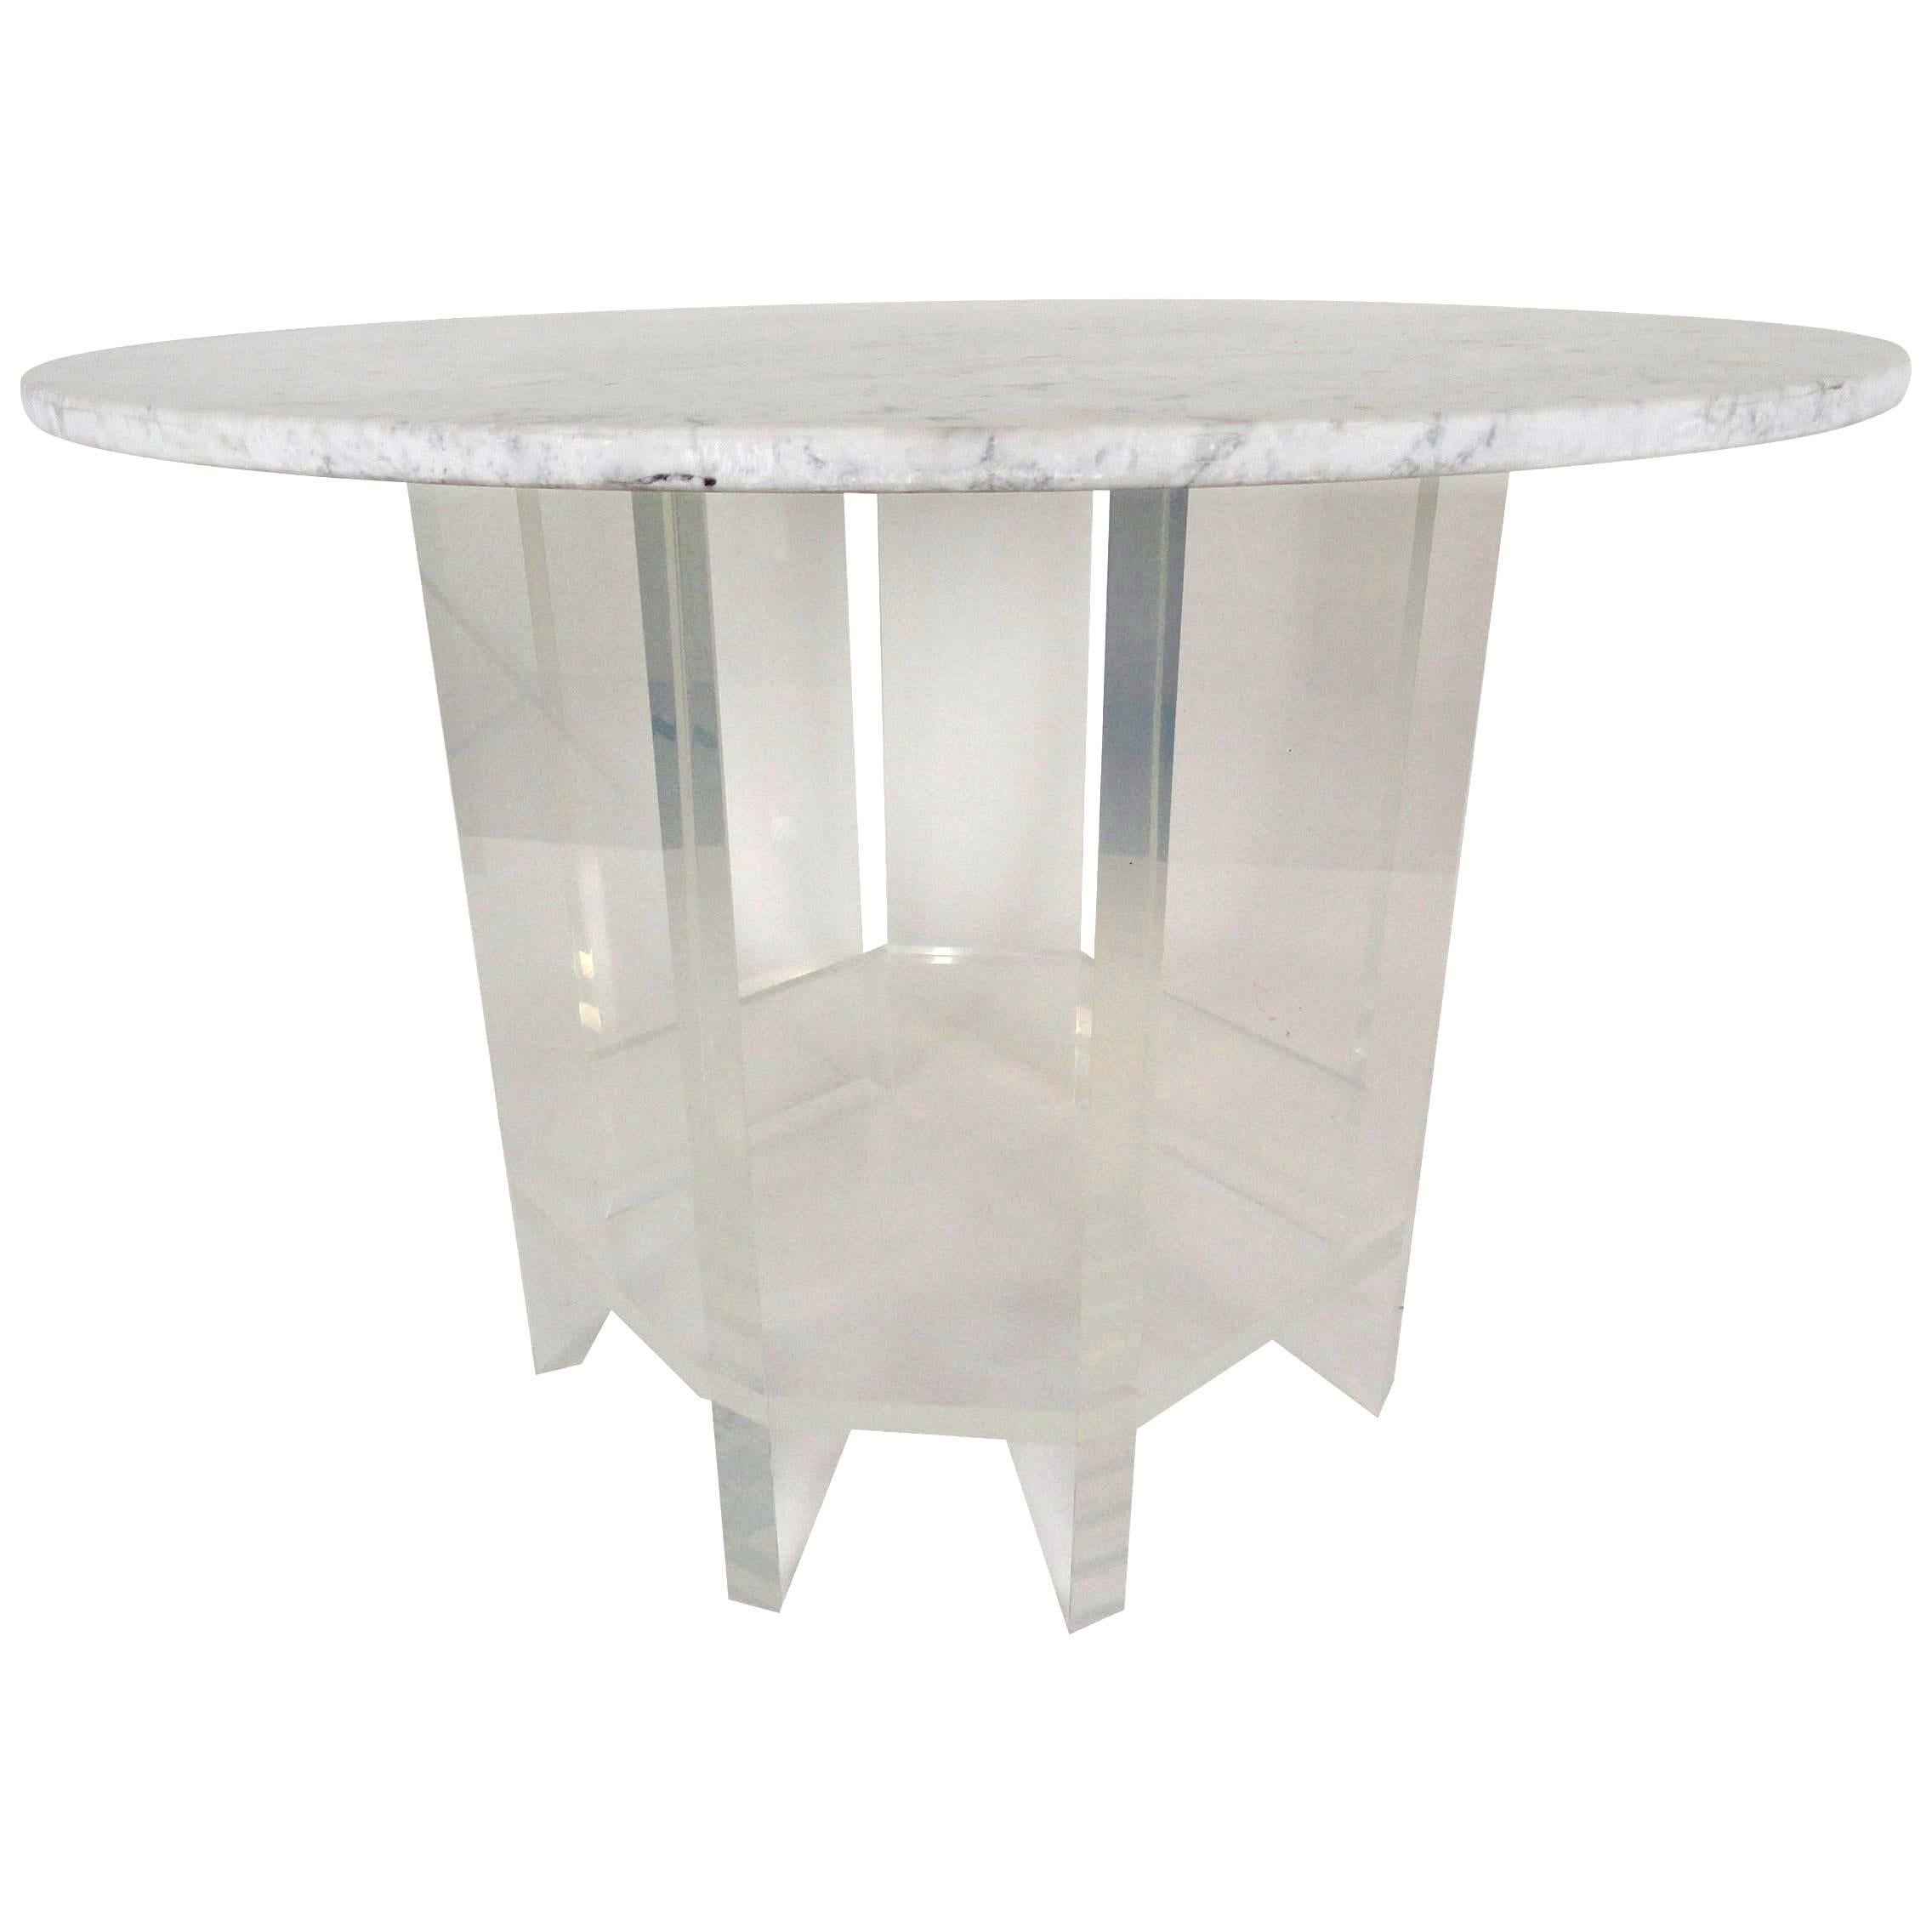 Jeffrey Bigelow Signed and Dated Acrylic Table Base For Sale